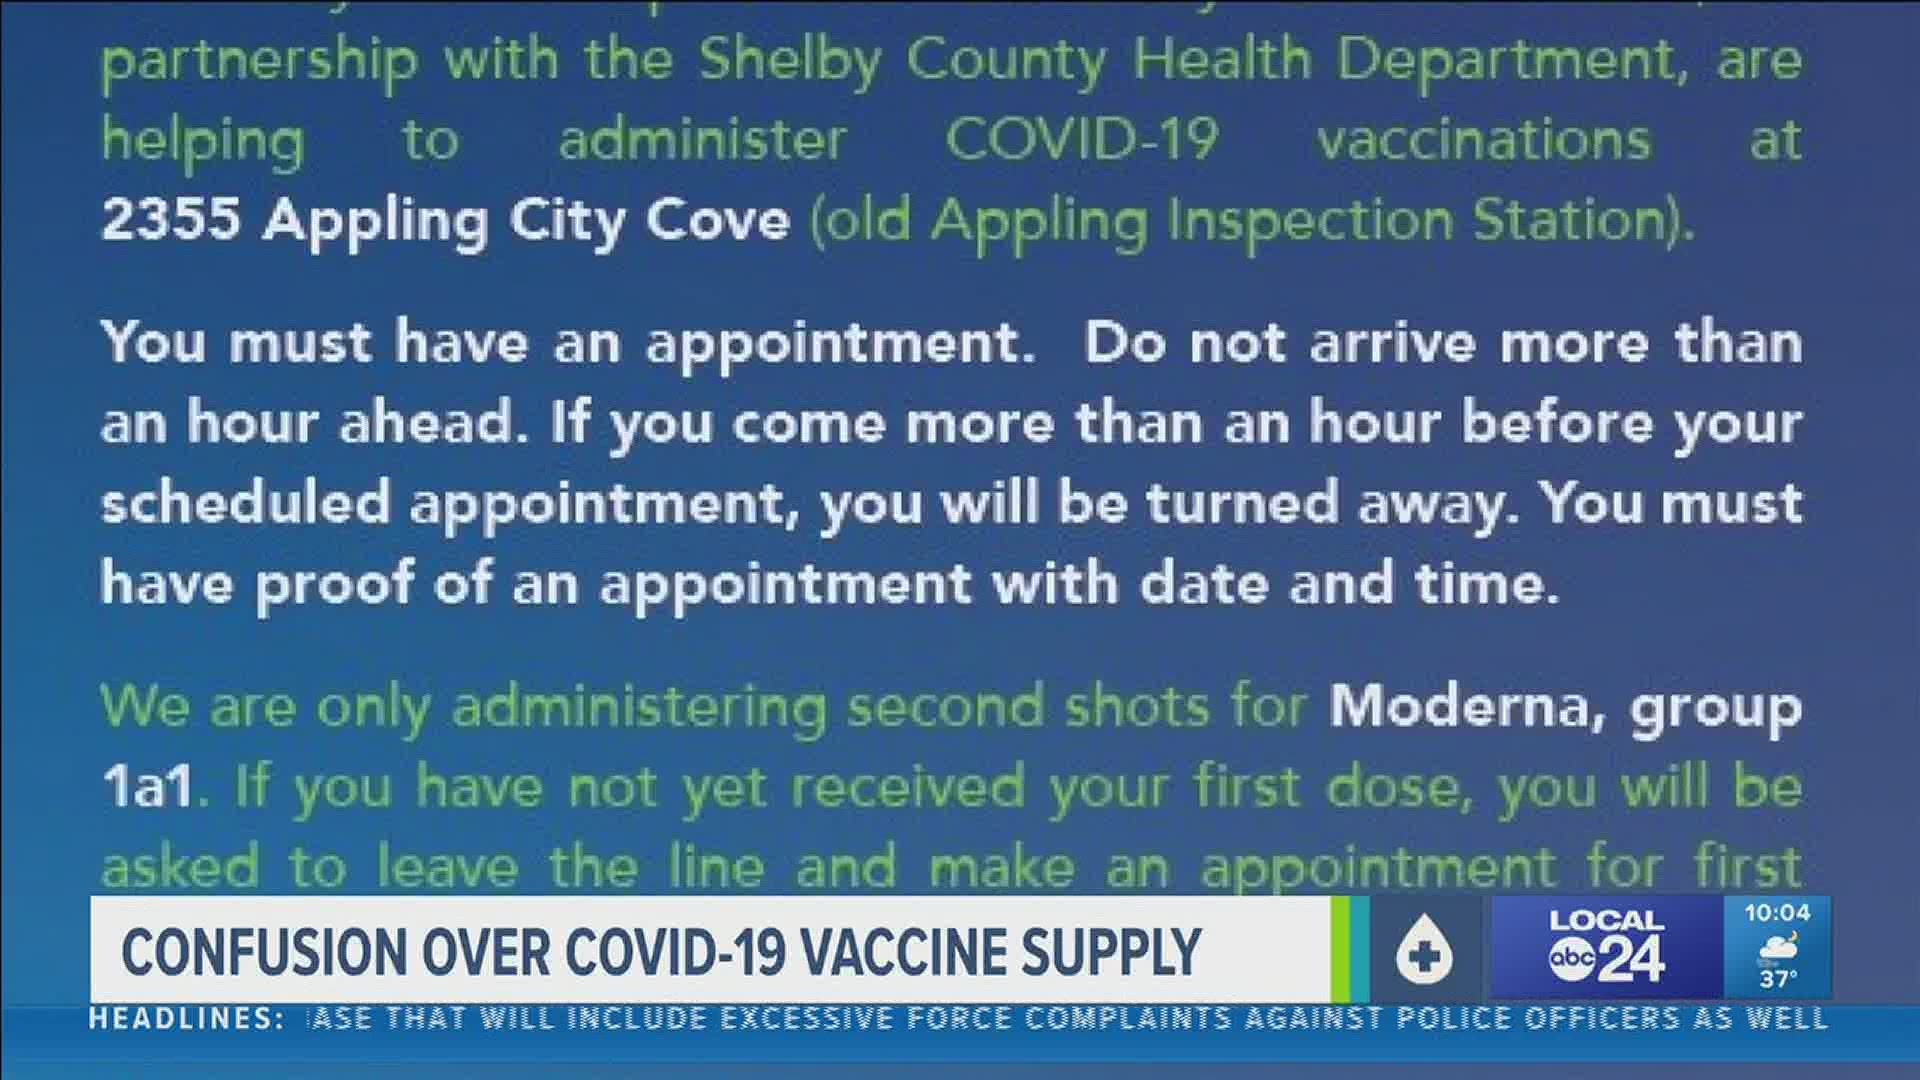 Shelby County chief health official apologizes for long lines and confusion at vaccination site and vows resolve.